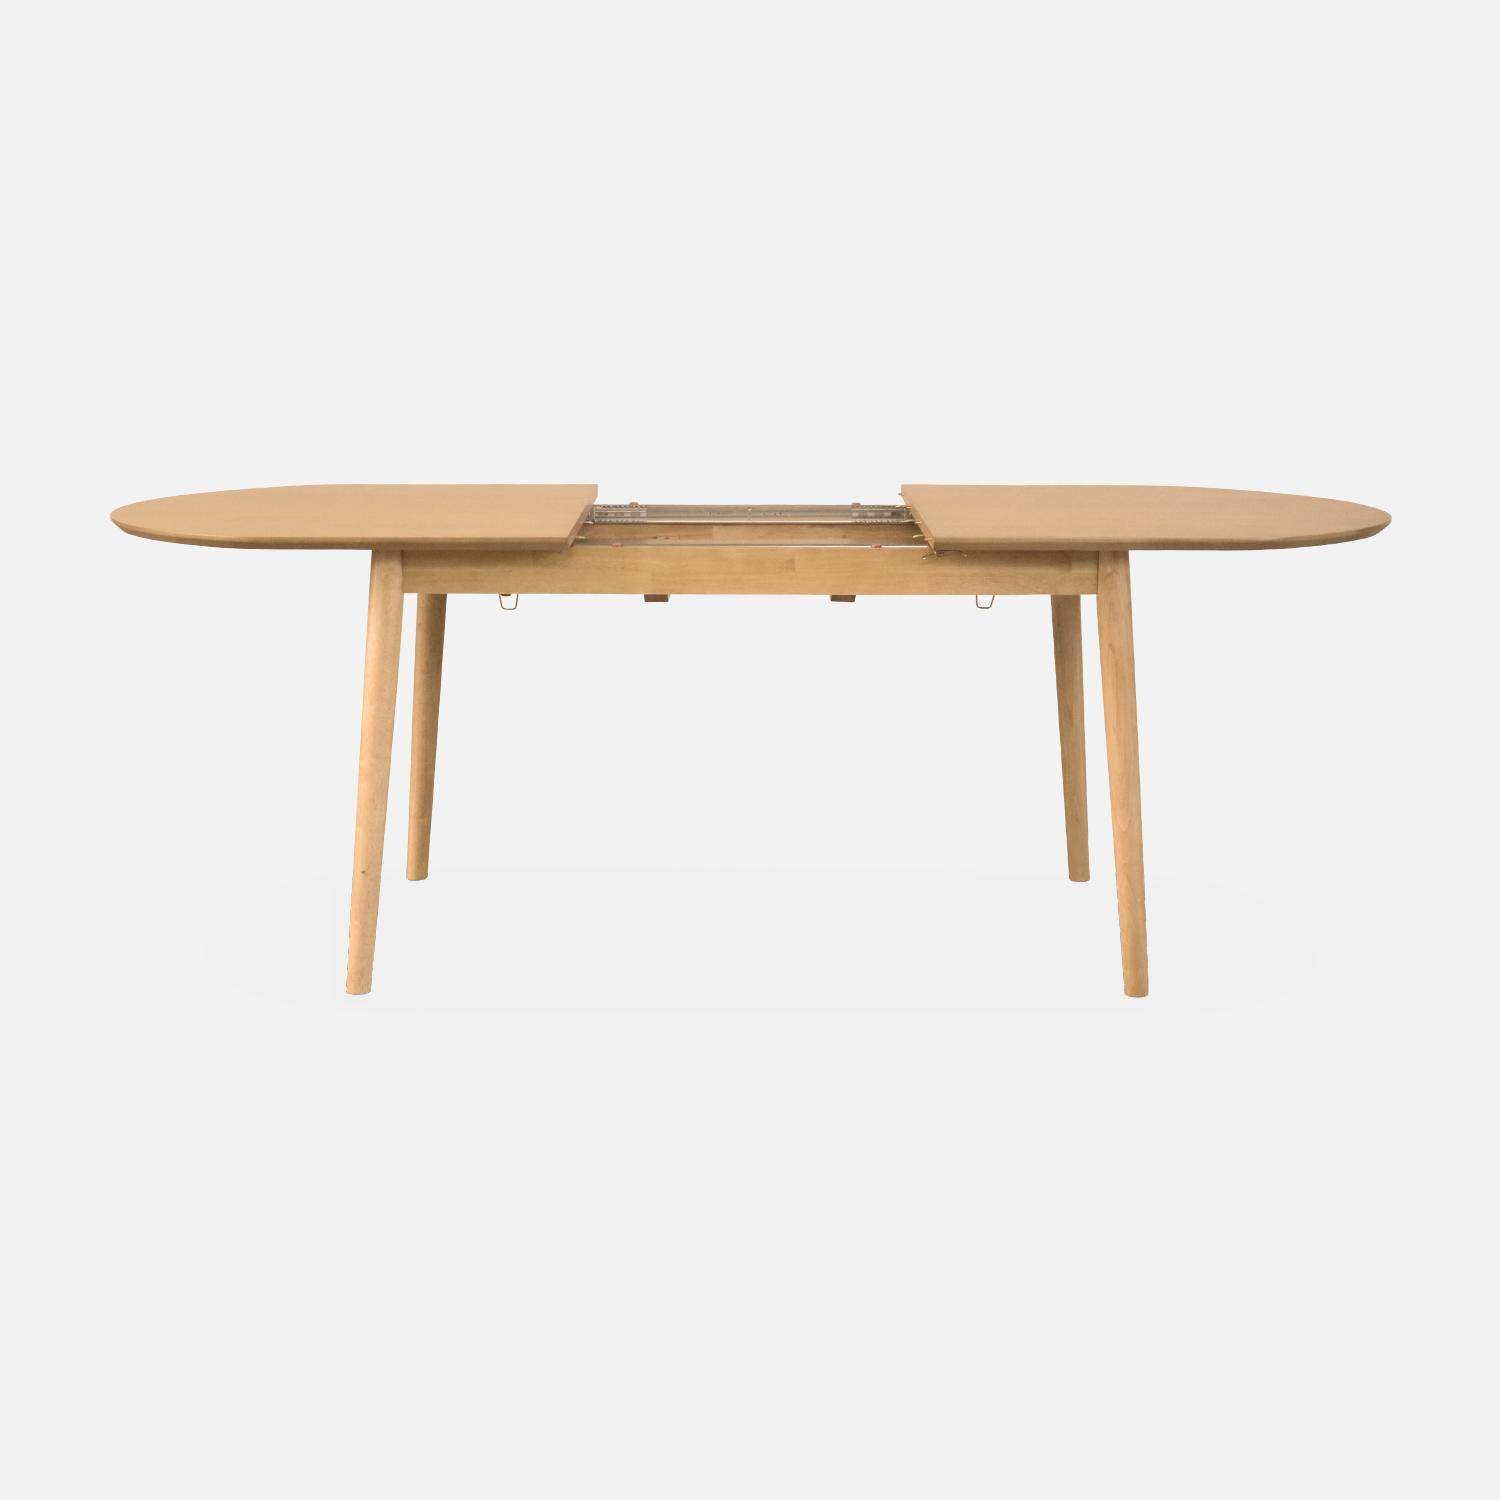 Extensible Oval Dining Table, 6 to 8 Seats, 160-210cm, natural Photo6